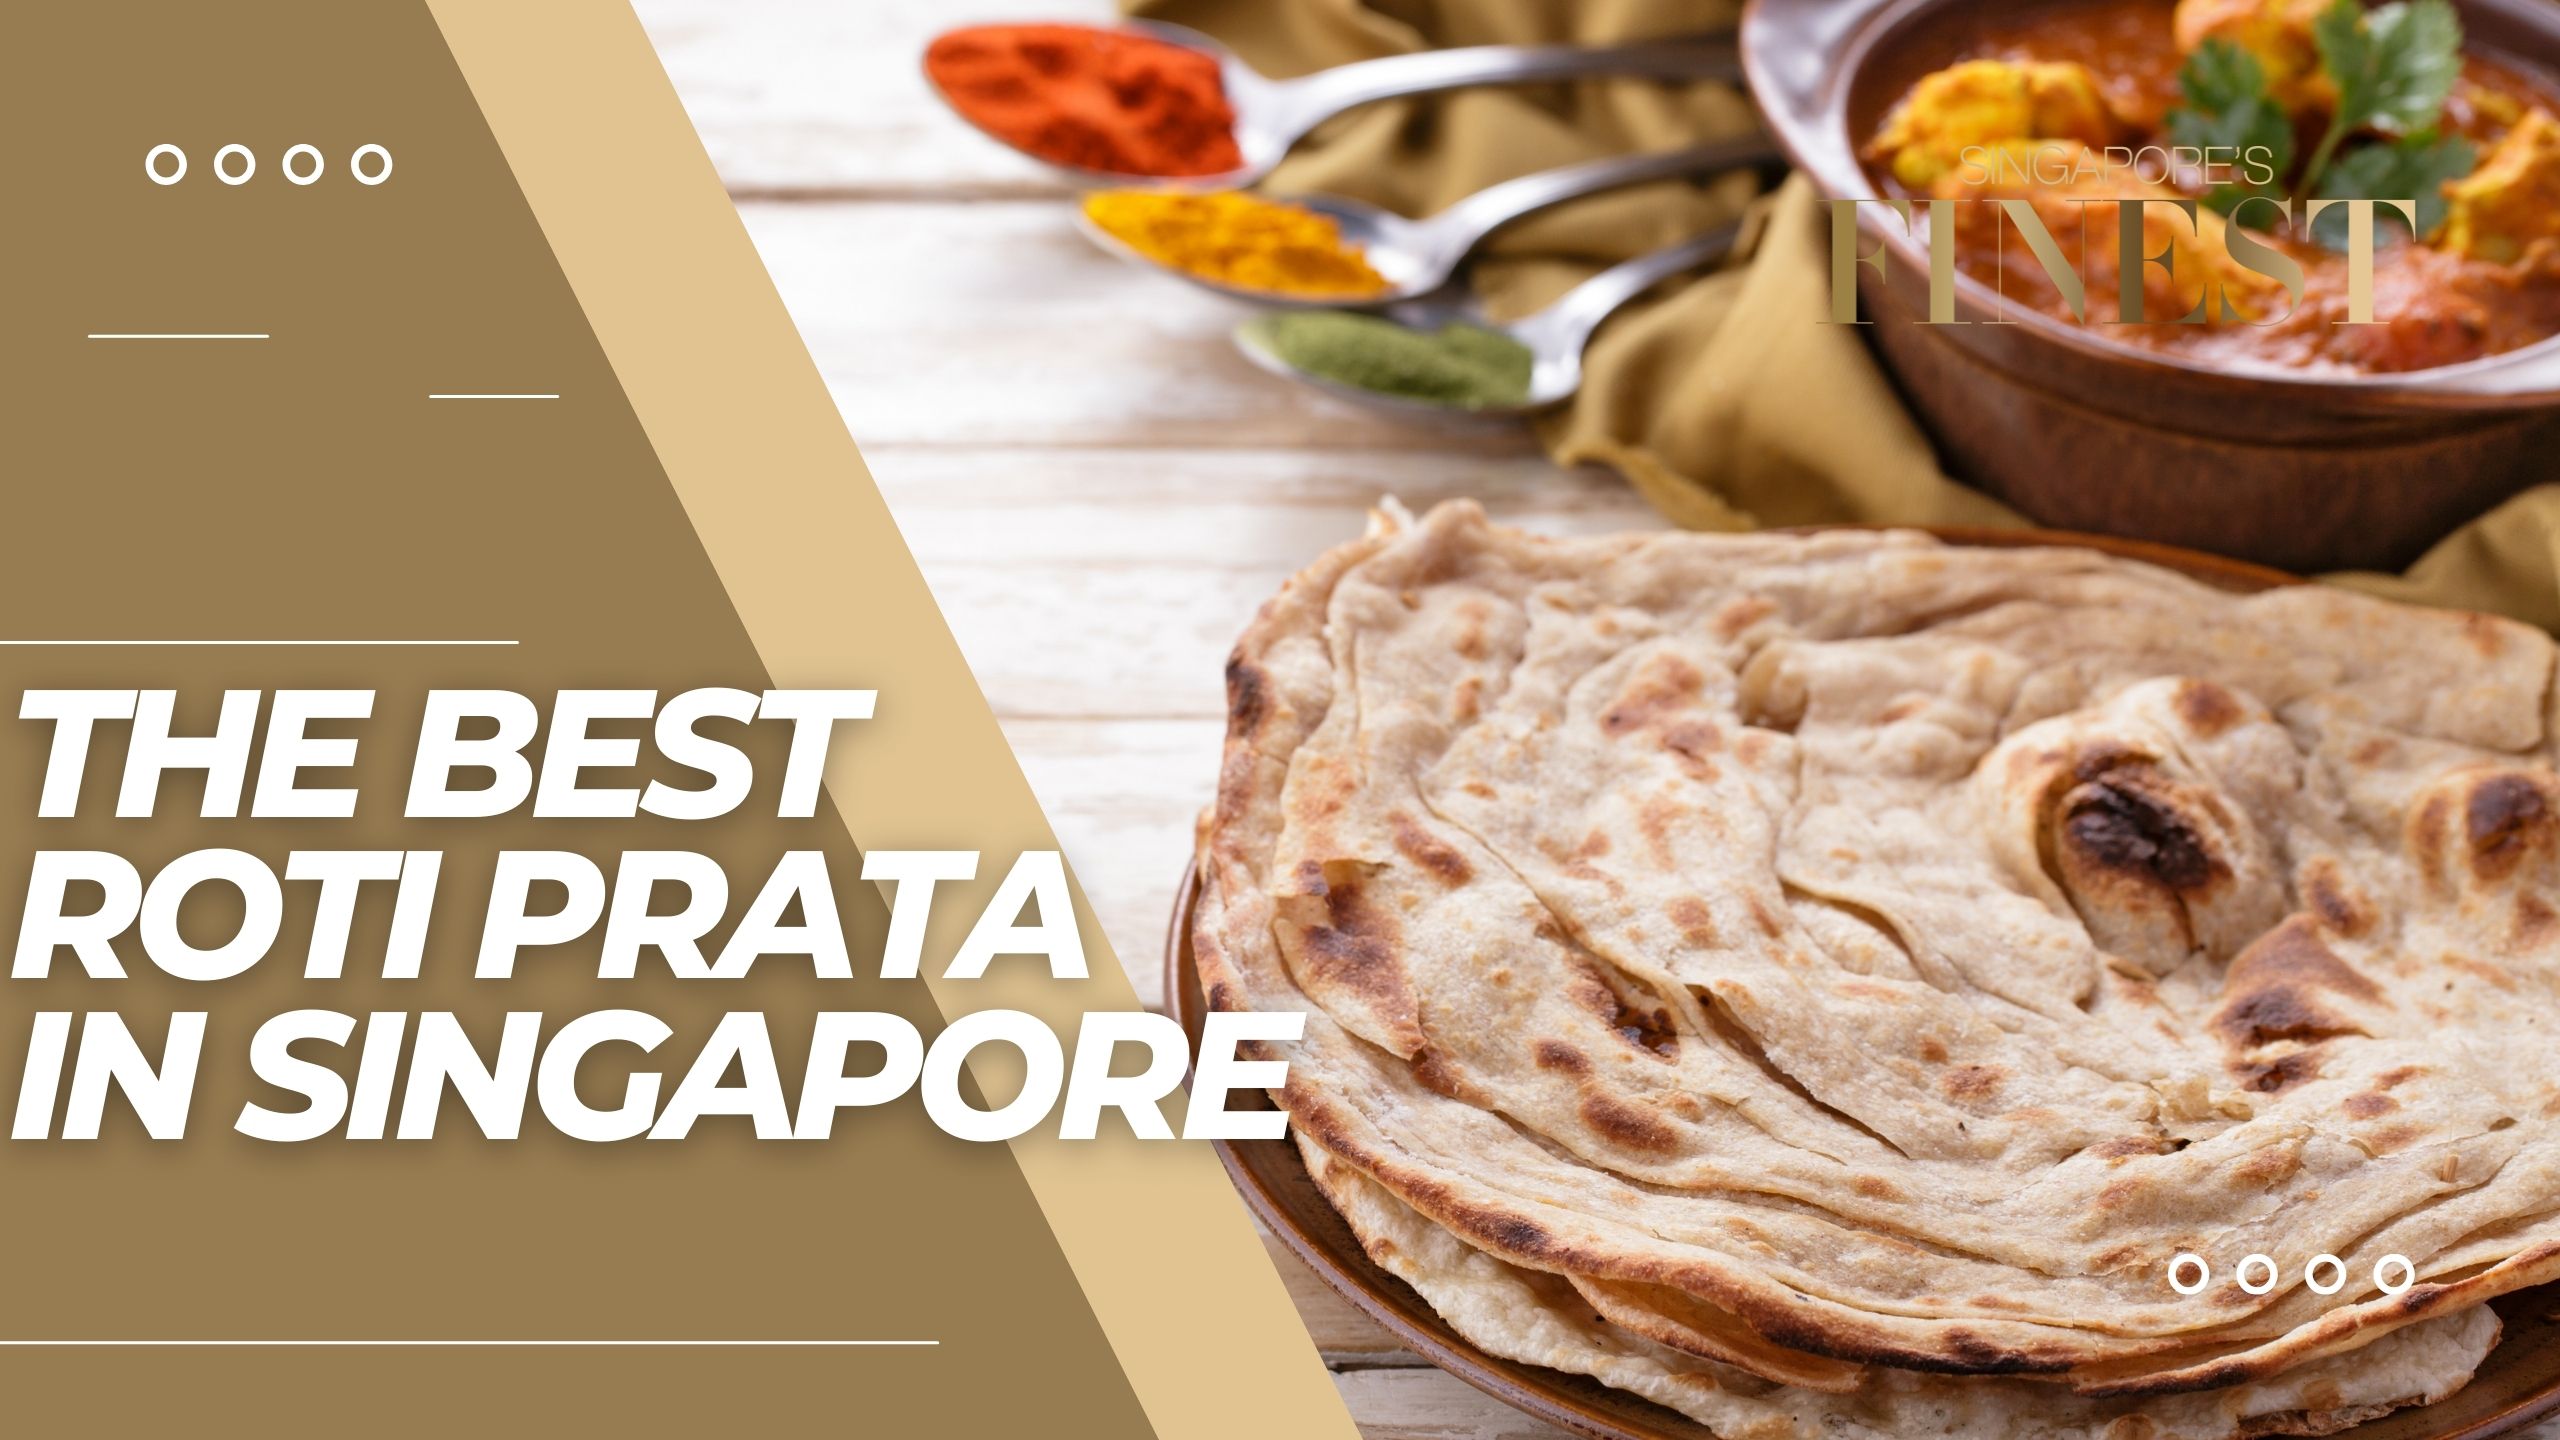 The Finest Spots for Roti Prata in Singapore